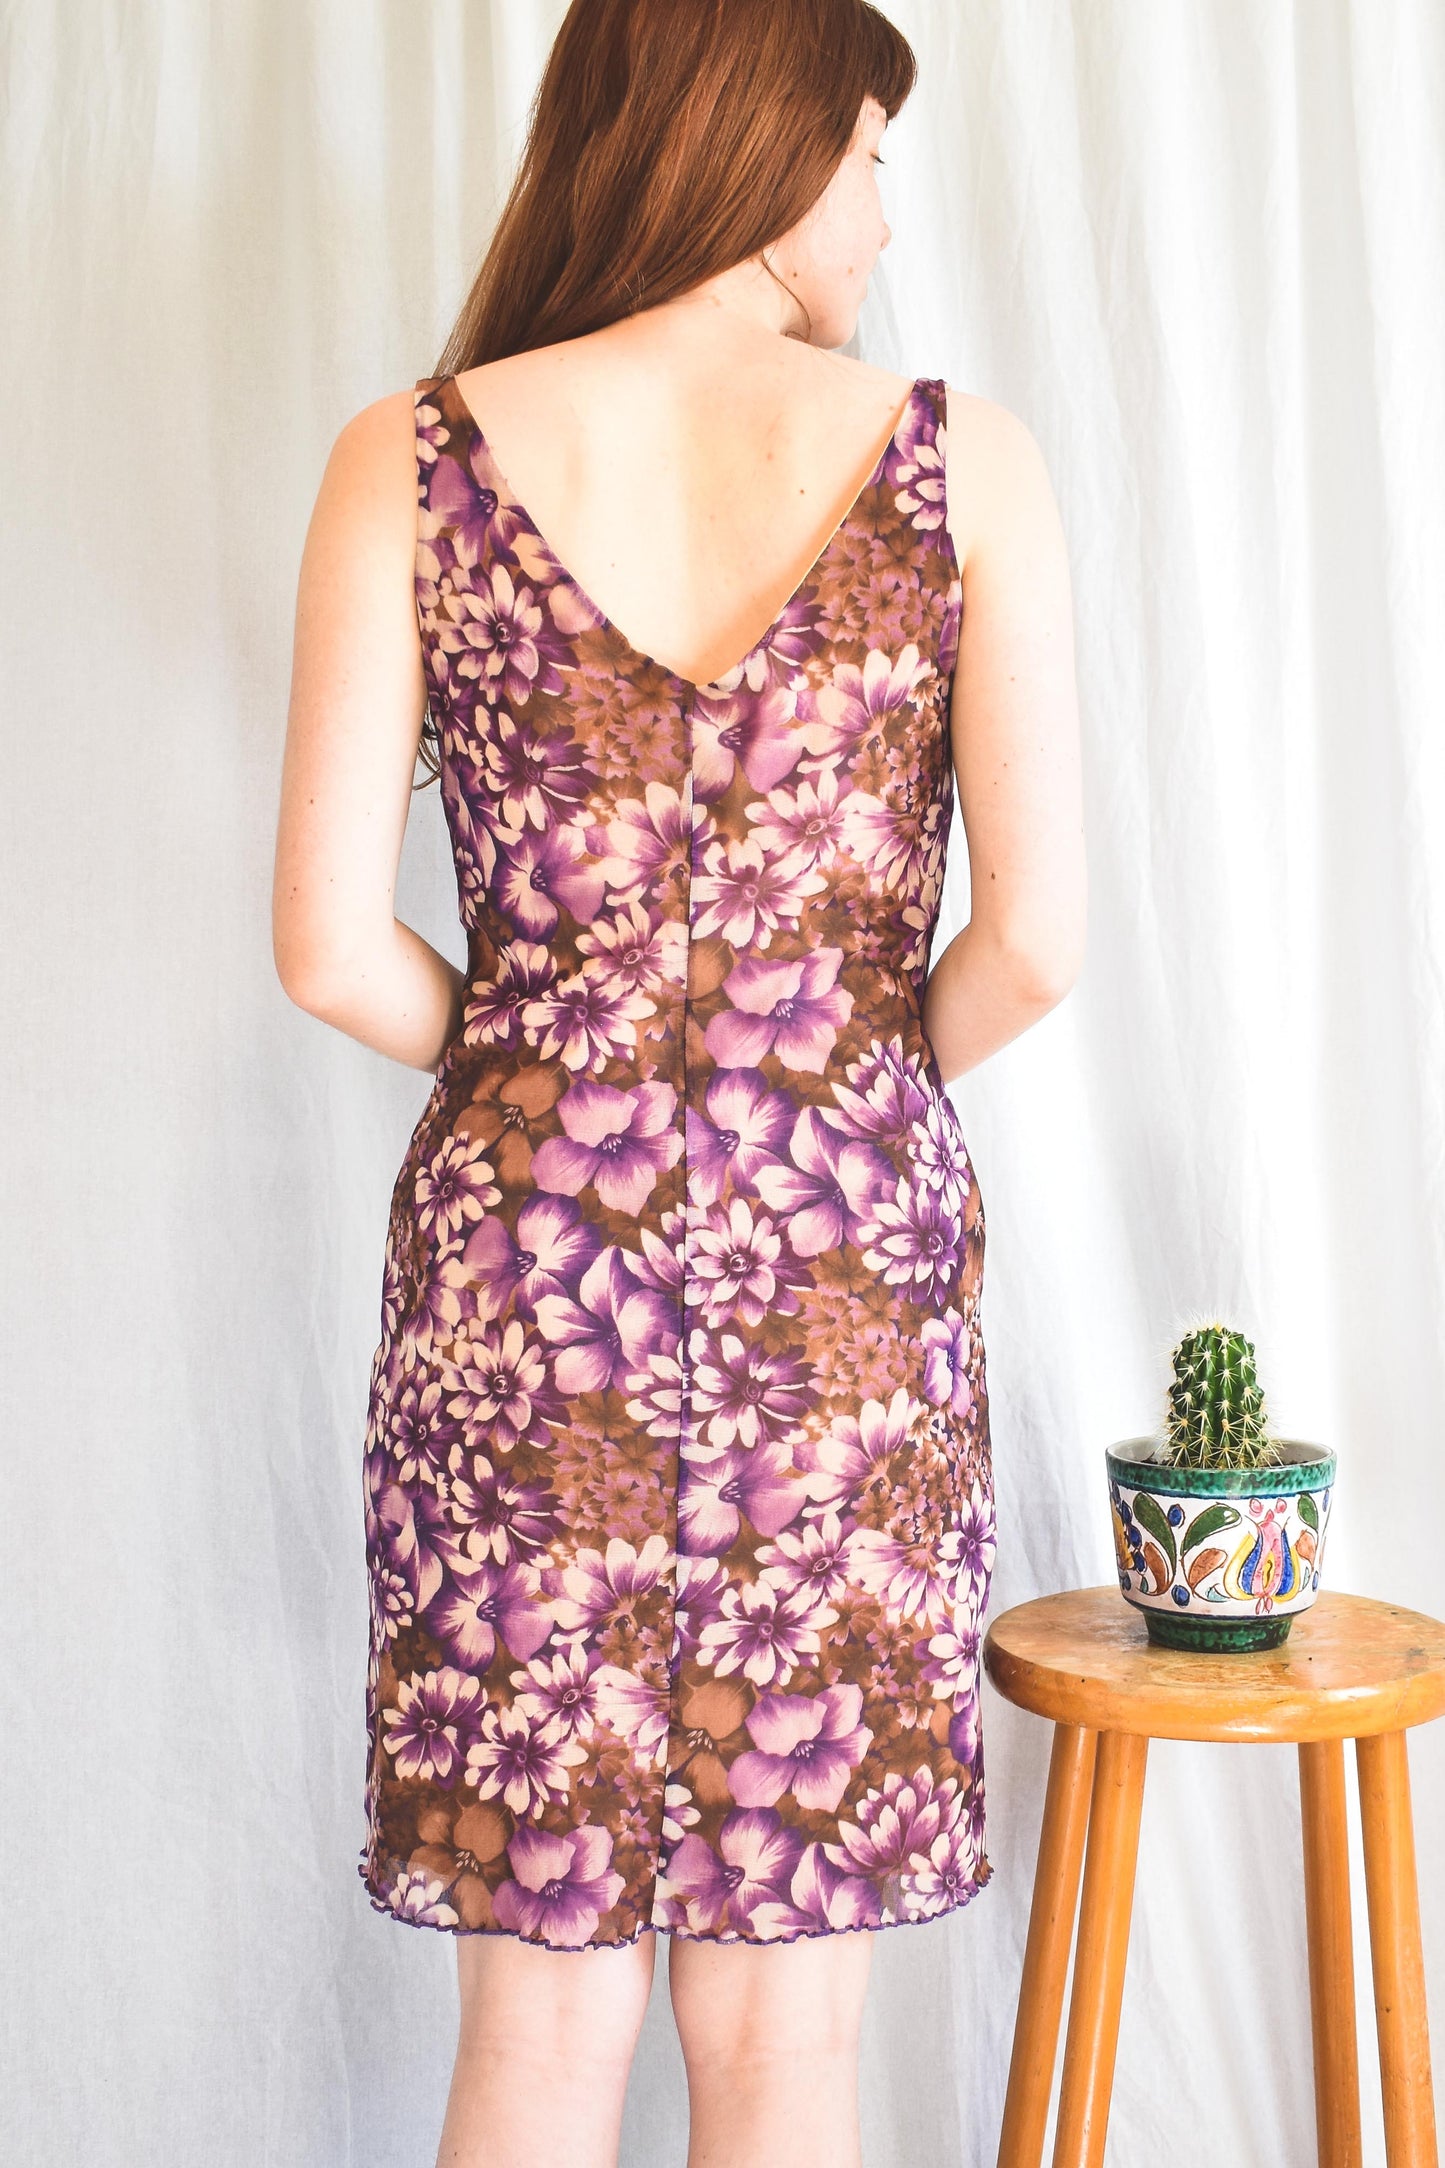 NEW IN! Floral dress